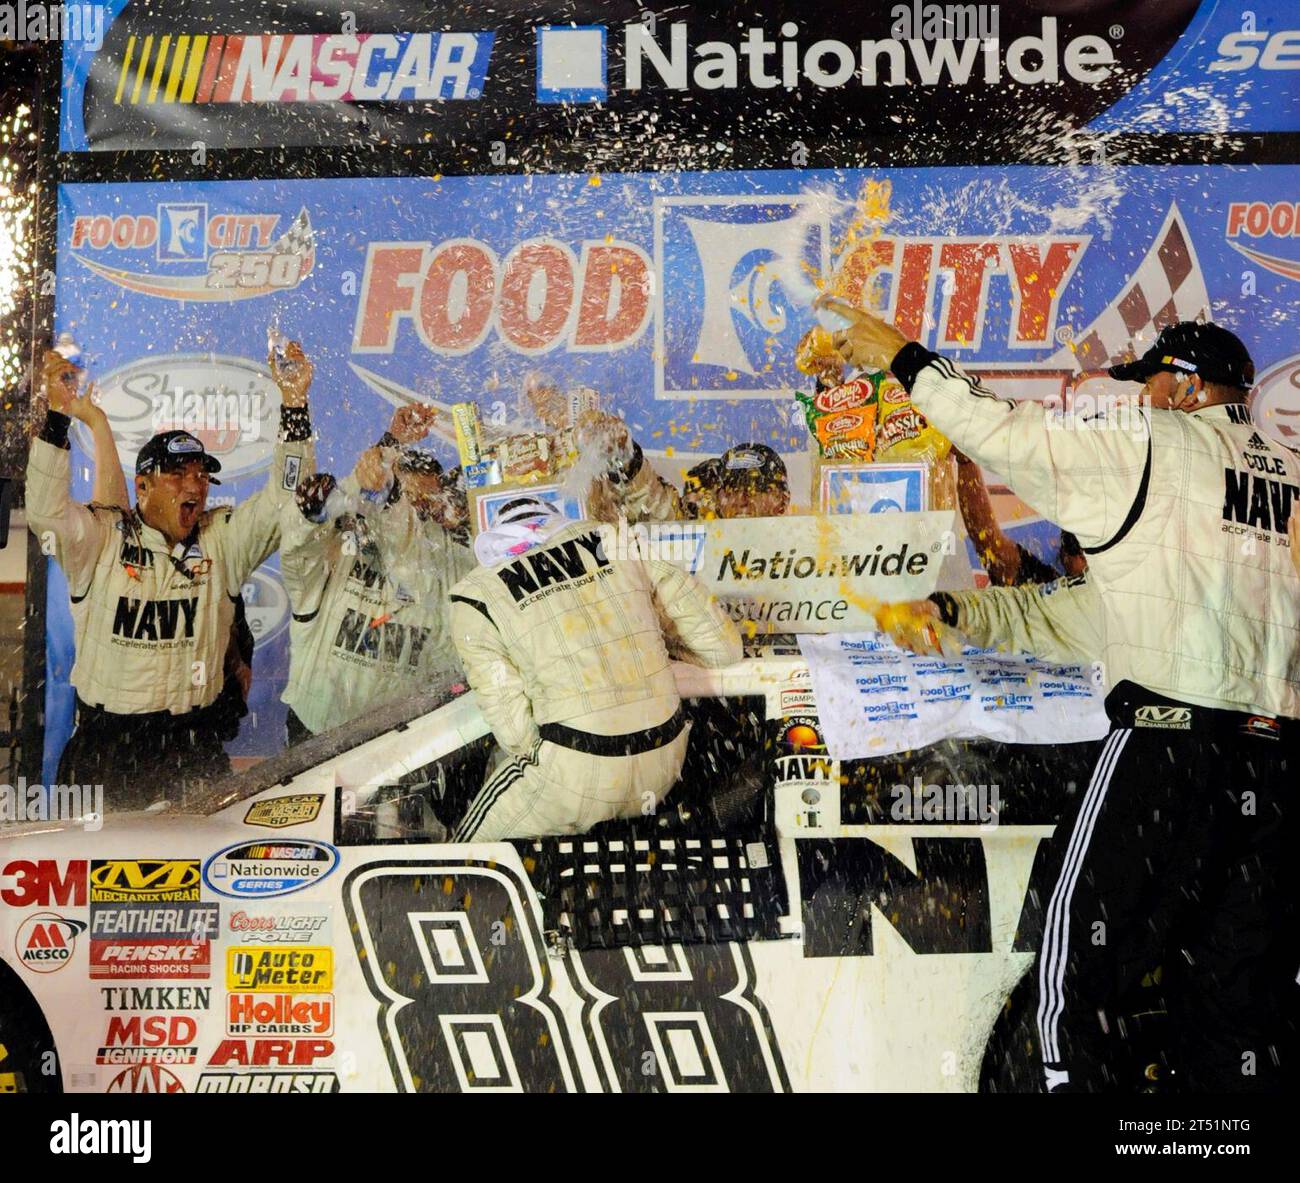 0808225345W-184 BRISTOL, Tenn. (Aug. 22, 2008) JR Motorsports team members shower driver Brad Keselowski with Gatorade and water in victory lane after winning the NASCAR Nationwide Series Food City 250 at Bristol Motor Speedway in Bristol. Keselowski overcame a 37th place starting position to claim his second career victory and won second place overall in the nationwide championship standings. Navy Stock Photo